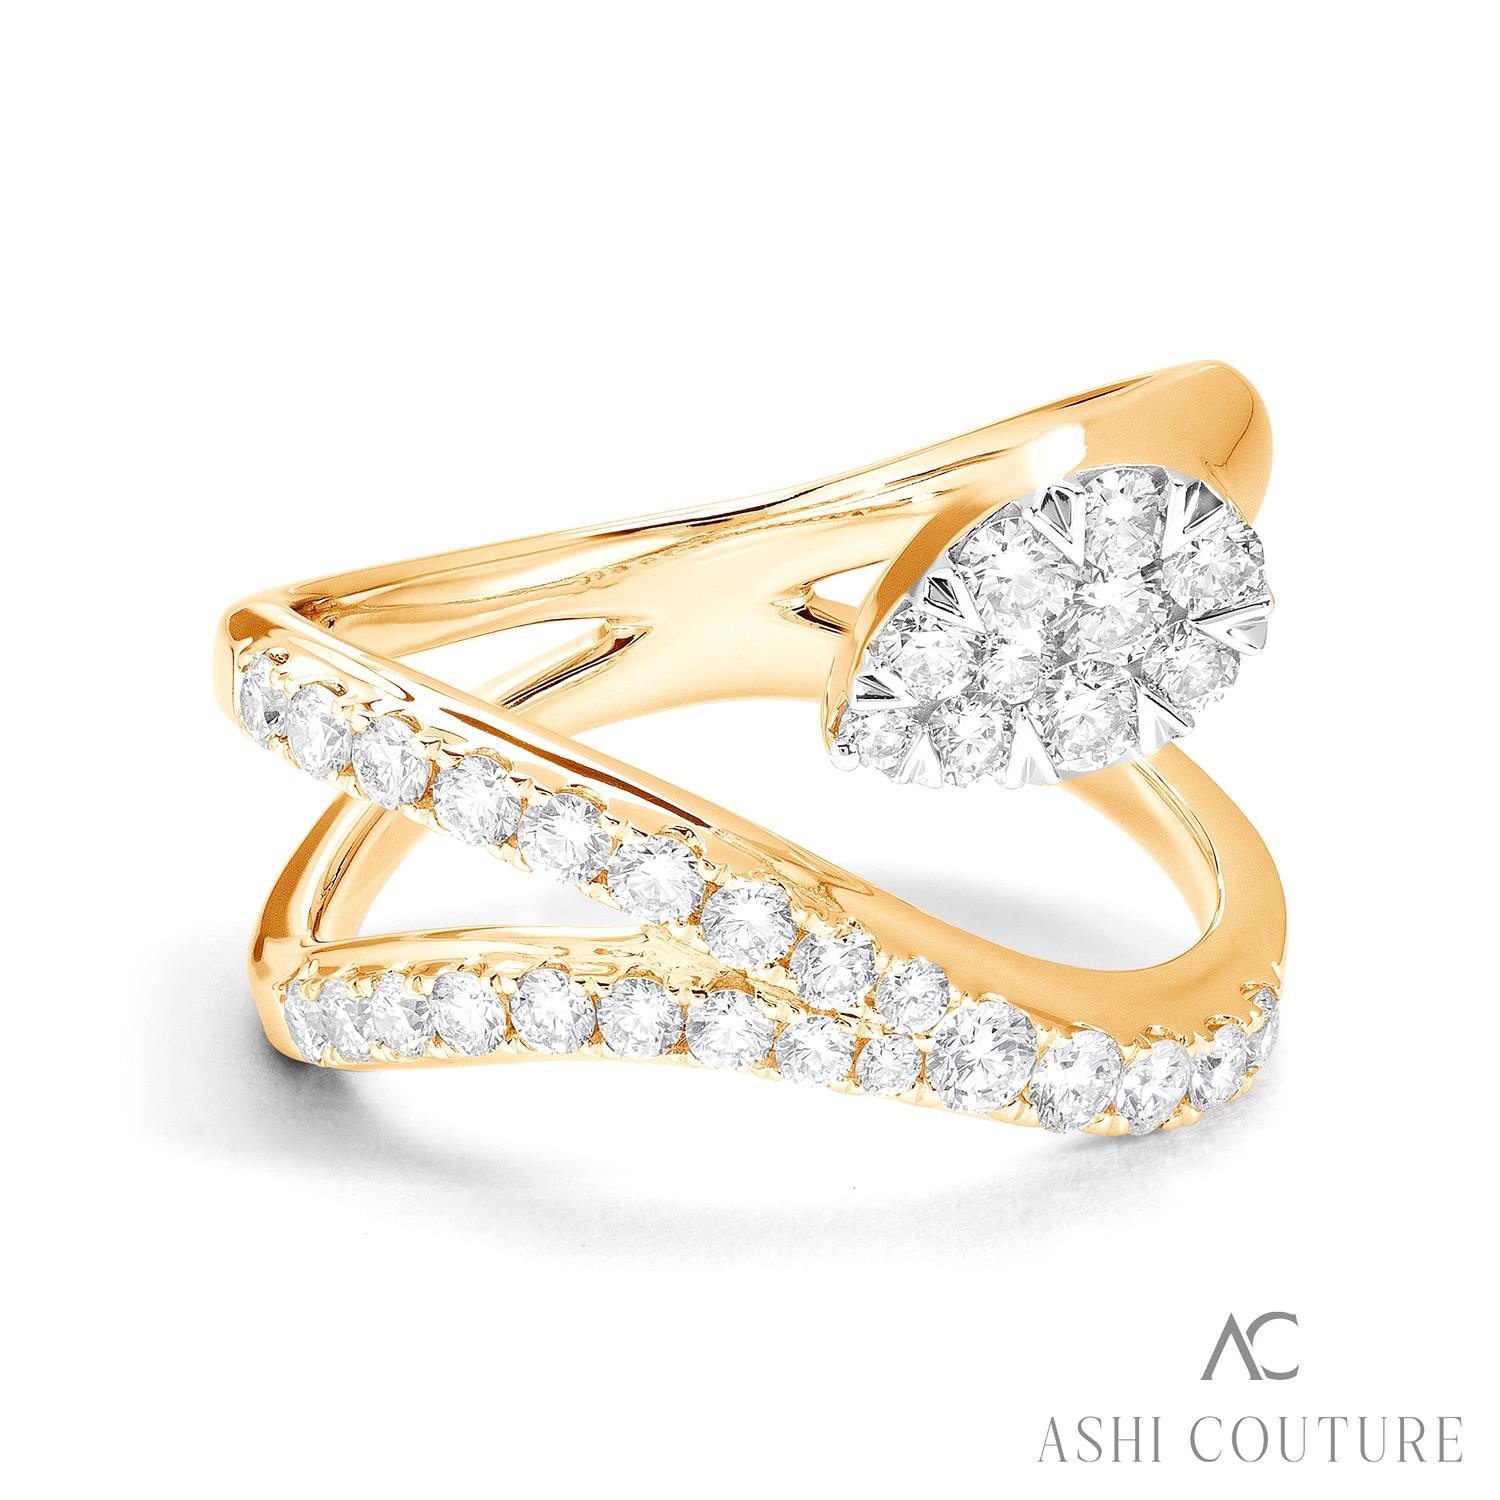 Couture 18 Karat Yellow Gold Ethereal Lovebright Diamond Open Split Shank Ring 0.90 Ct